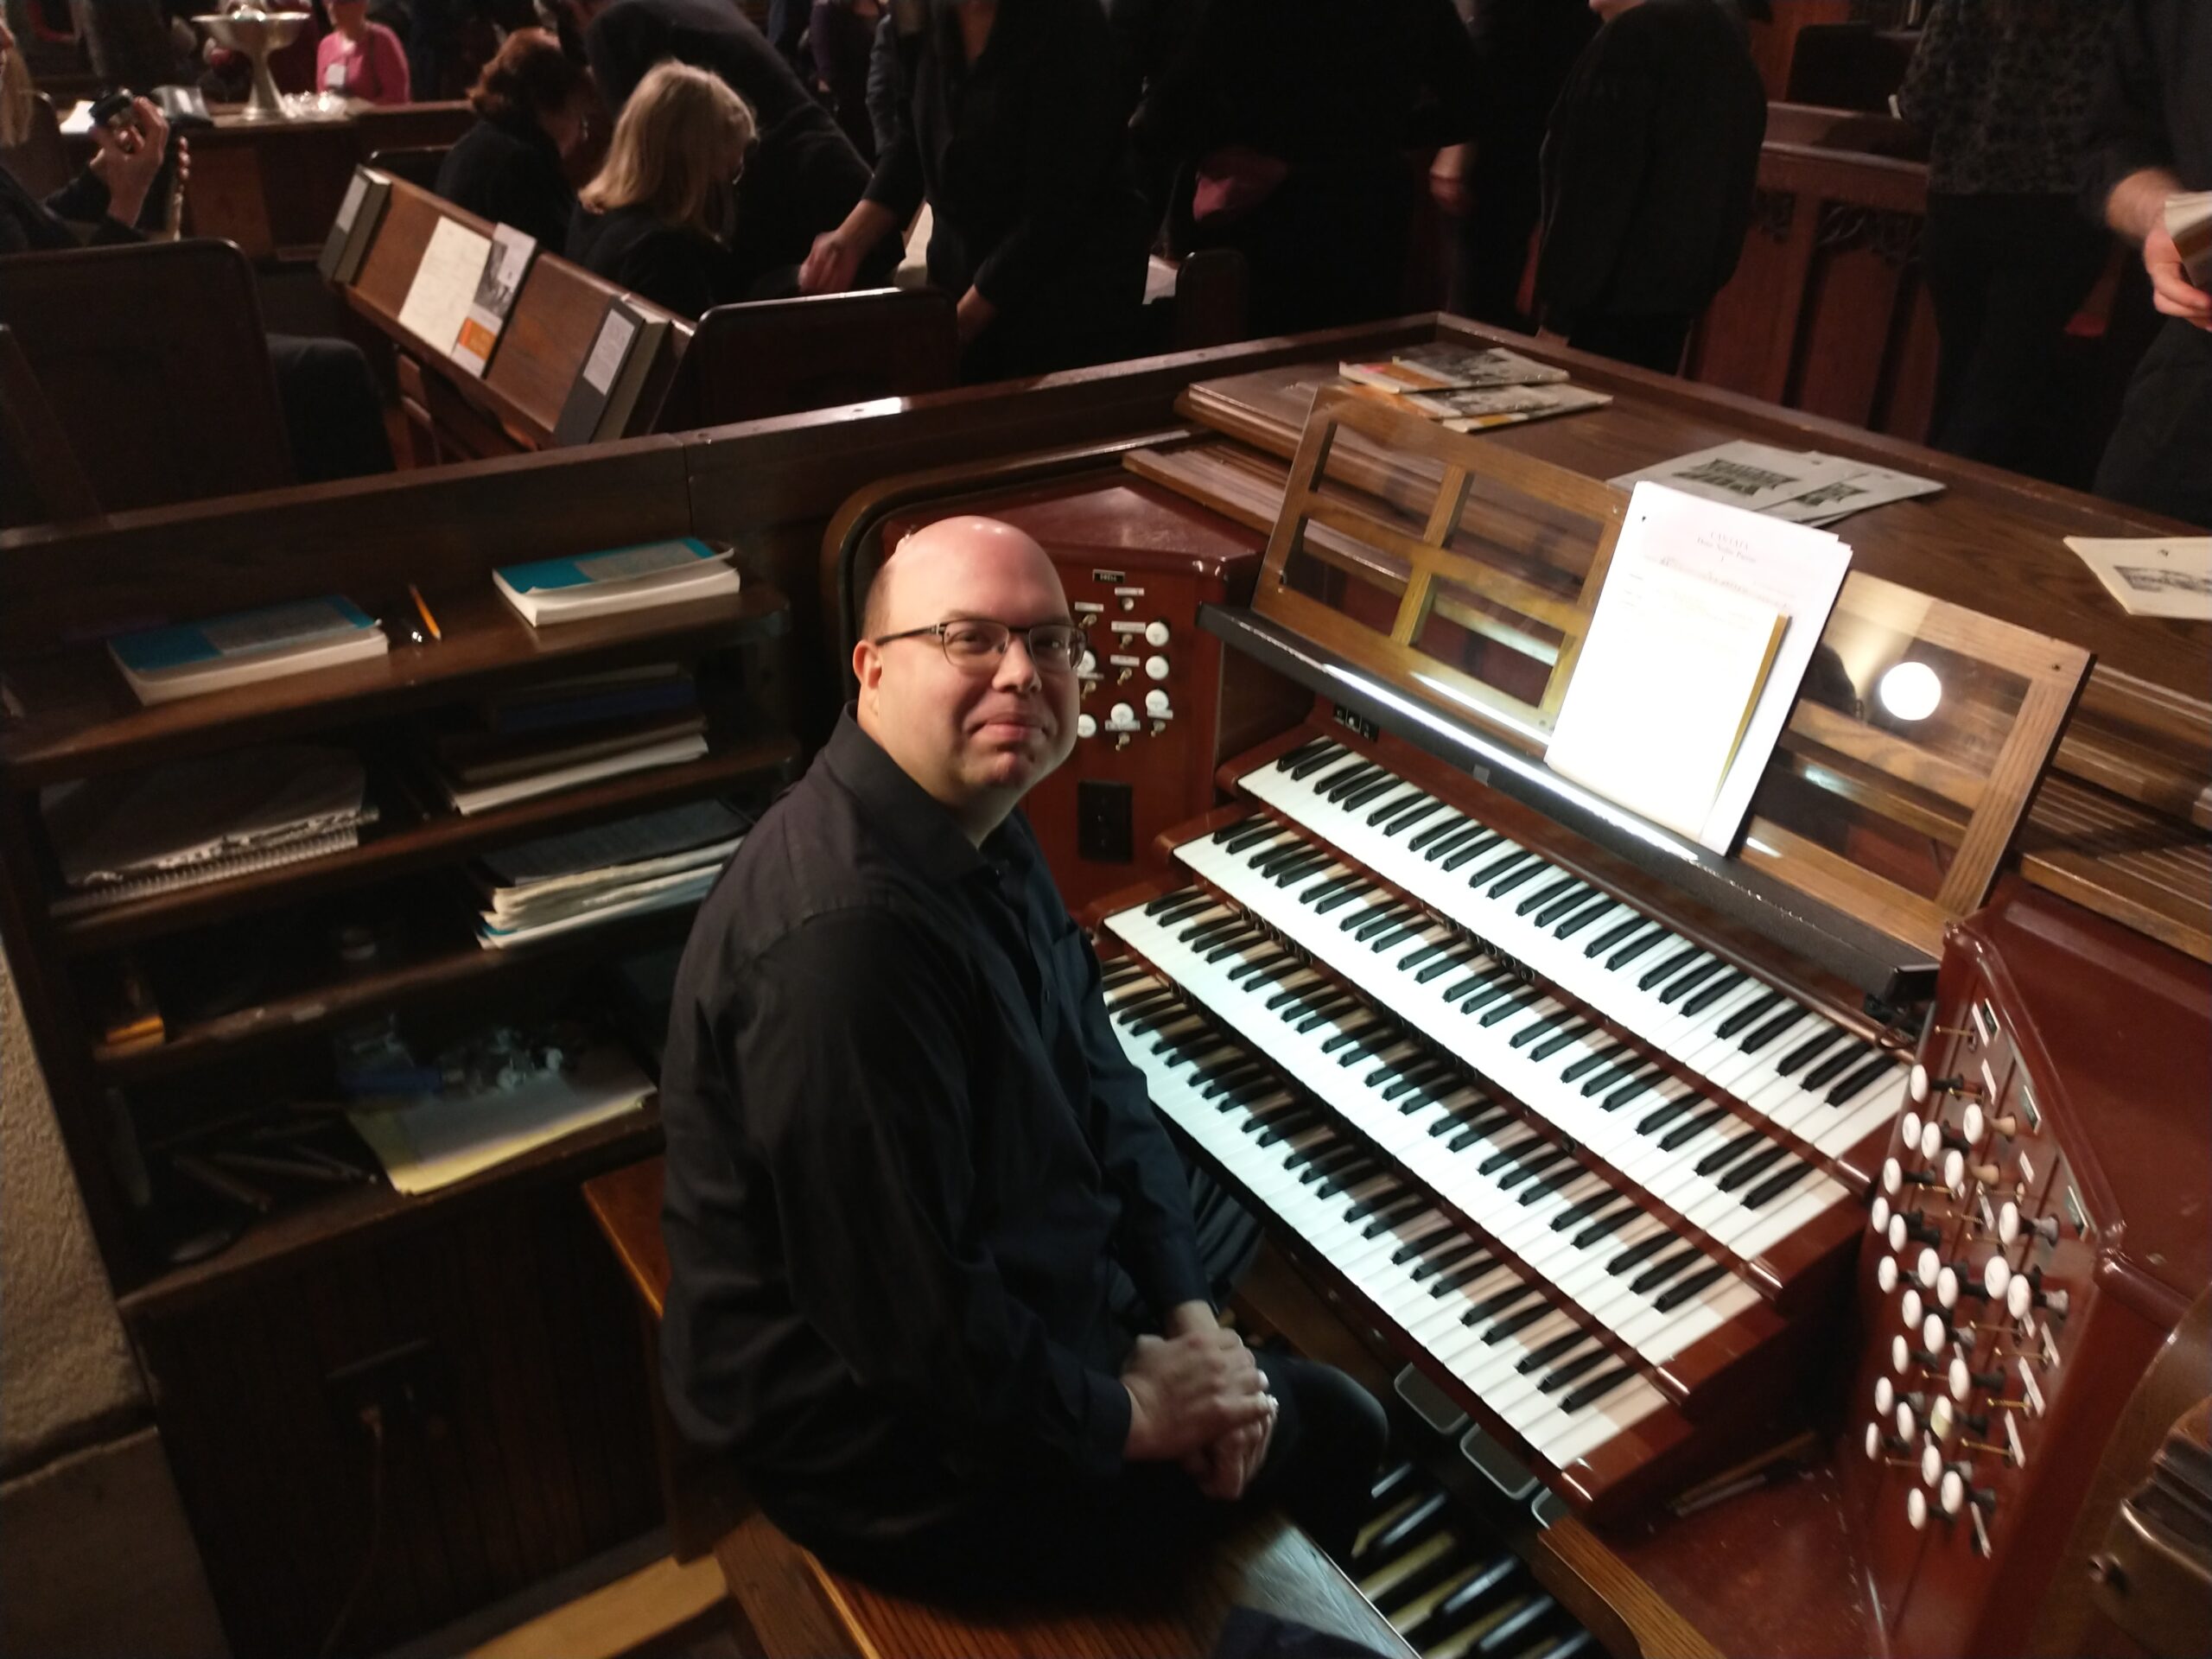 A bald man with glasses dressed in a black long-sleeved shirt and black pants sits at the complex keyboard of a pipe organ, with seated choir members in the background.